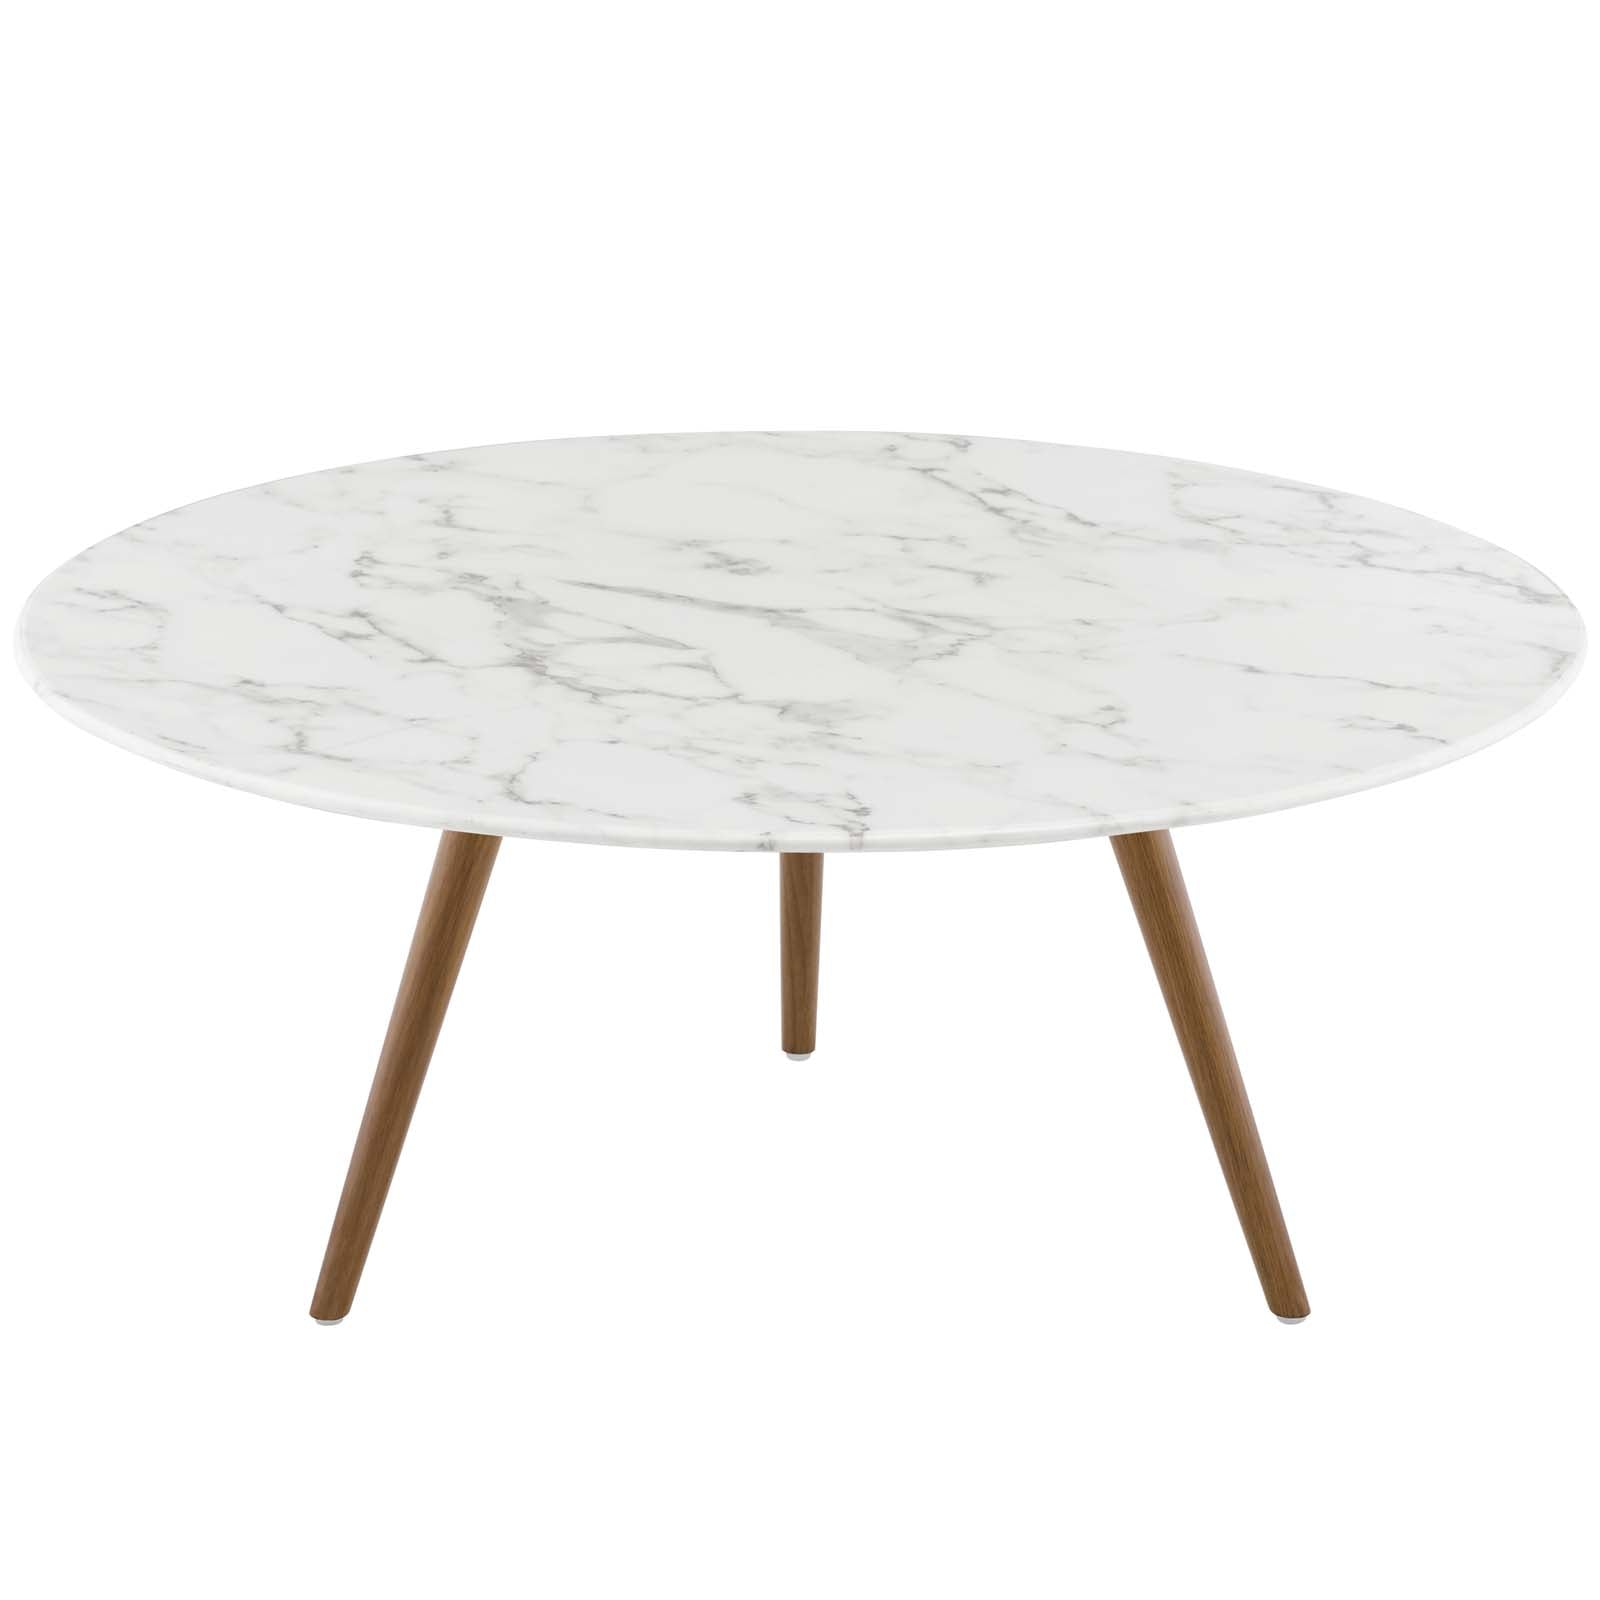 Lippa 36" Round Artificial Marble Top Coffee Table - Wood Tripod Base Dining Table